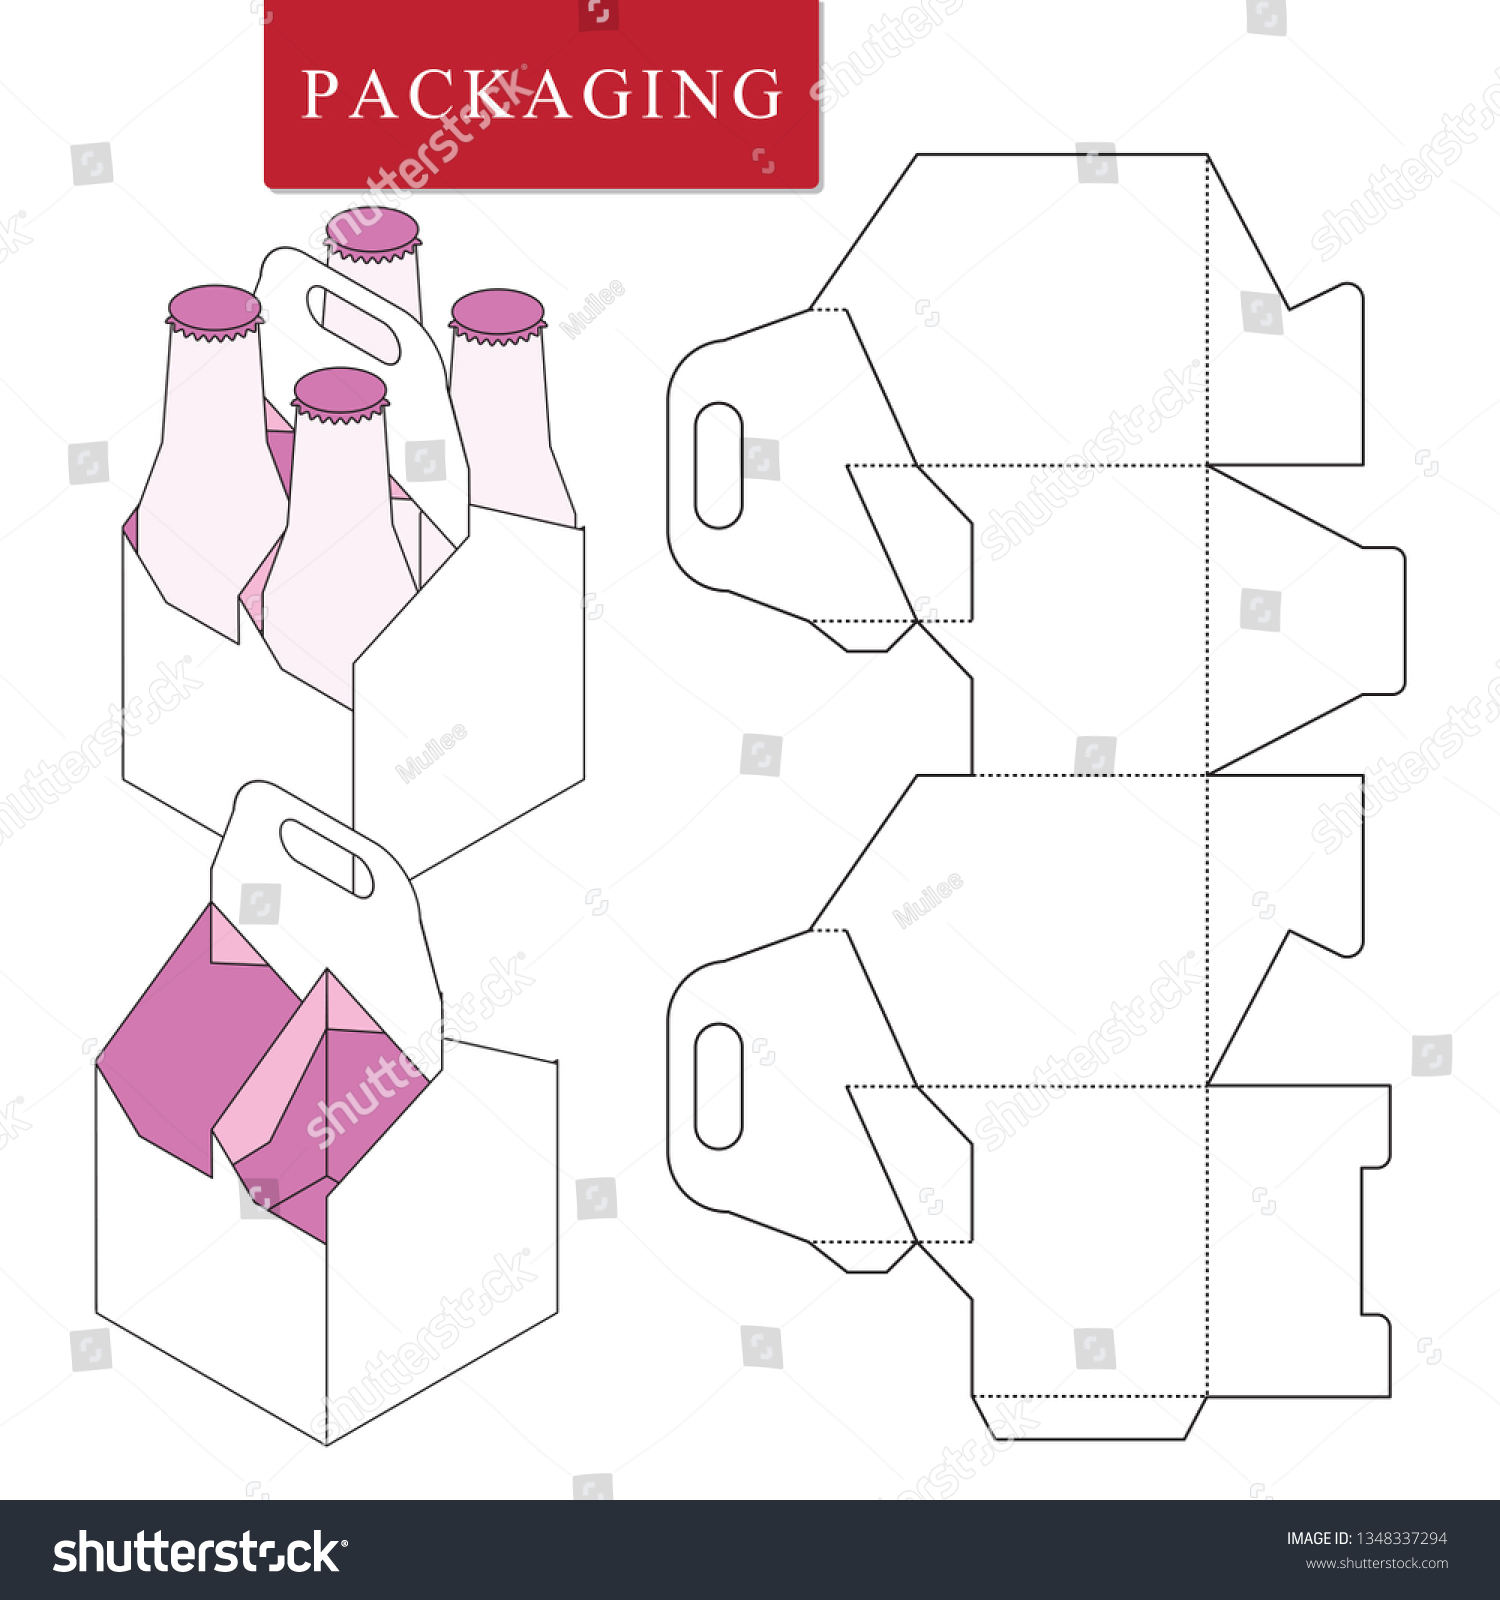 Packaging Can Bottle Stock Vector (Royalty Free) 1348337294 | Shutterstock